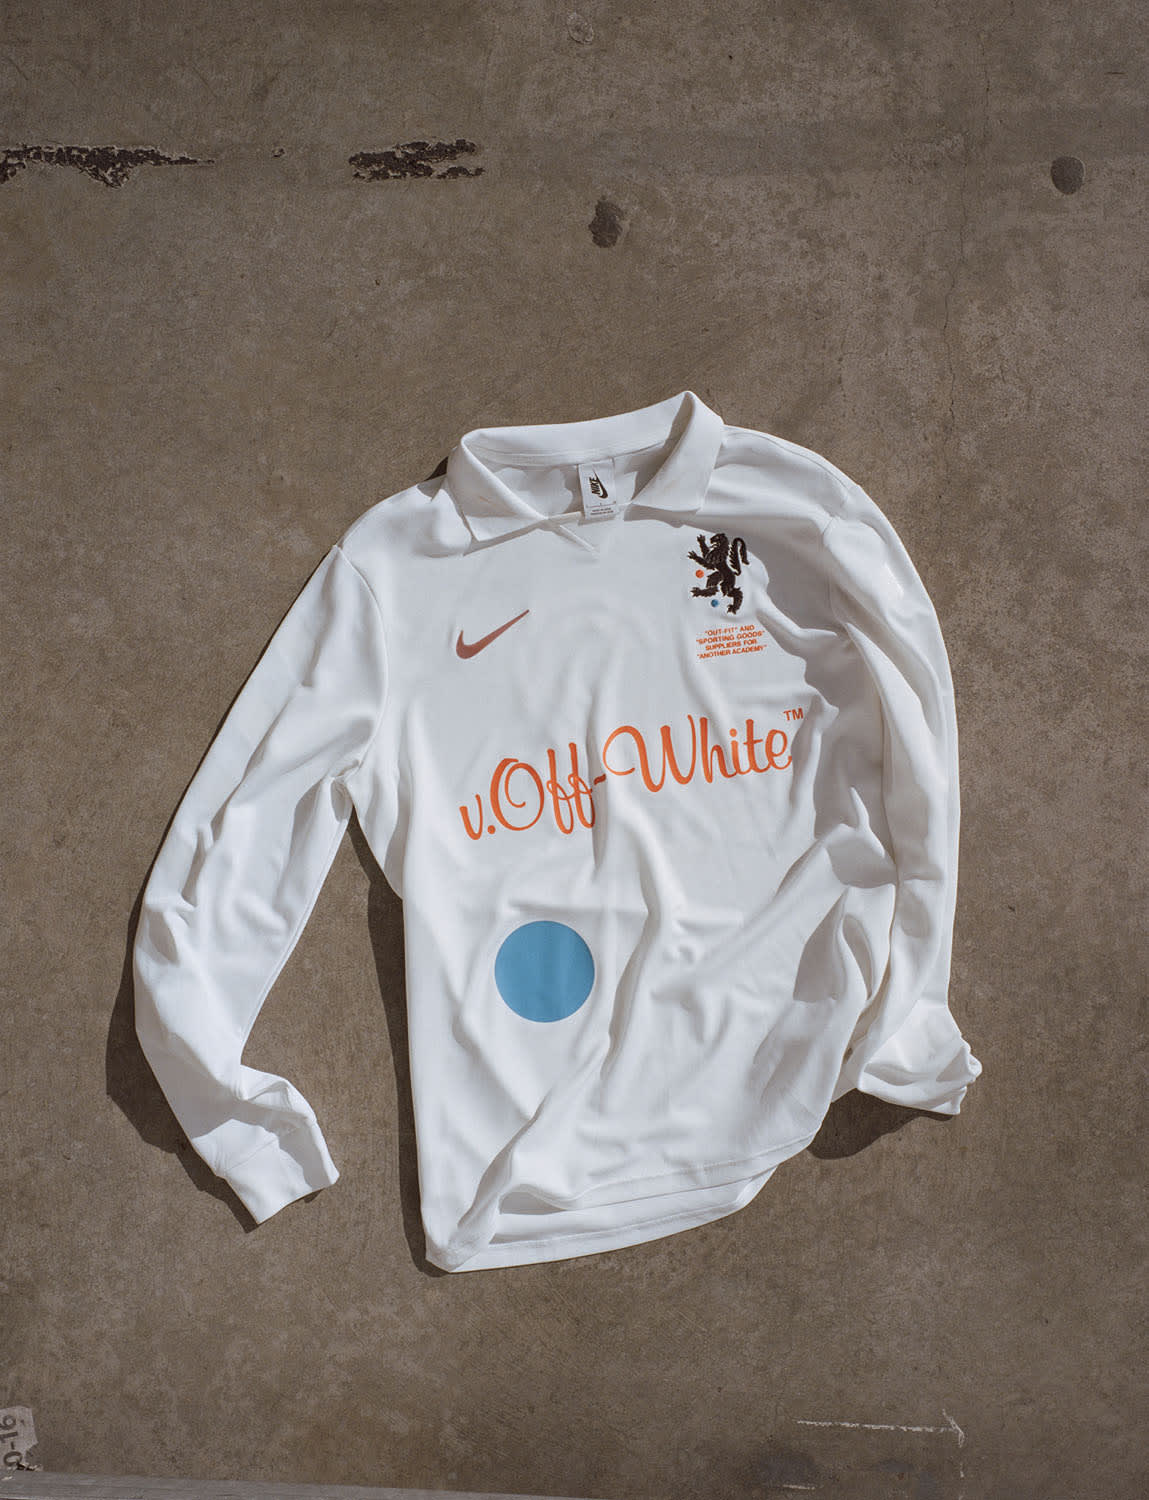 Off-White x Nike Football Mon Amour Collection (4)